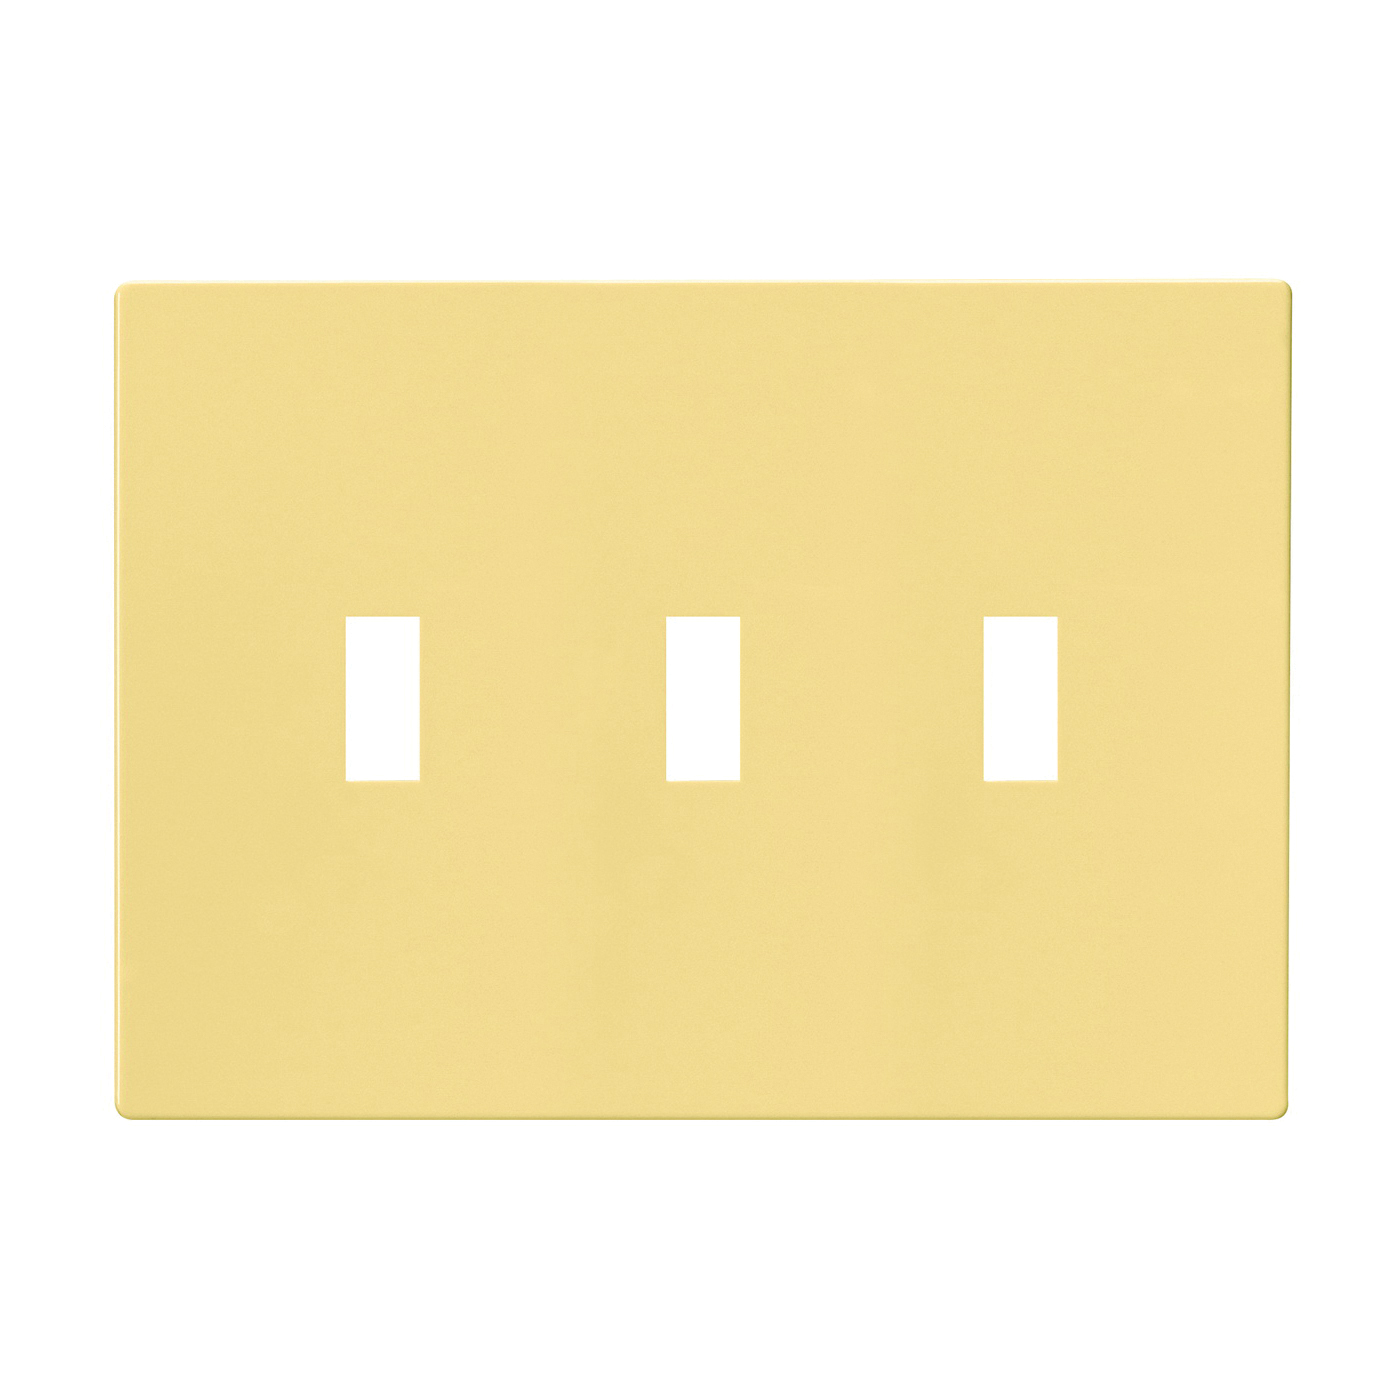 Eaton Wiring Devices PJS3V Wallplate, 4-7/8 in L, 6-3/4 in W, 3 -Gang, Polycarbonate, Ivory, High-Gloss